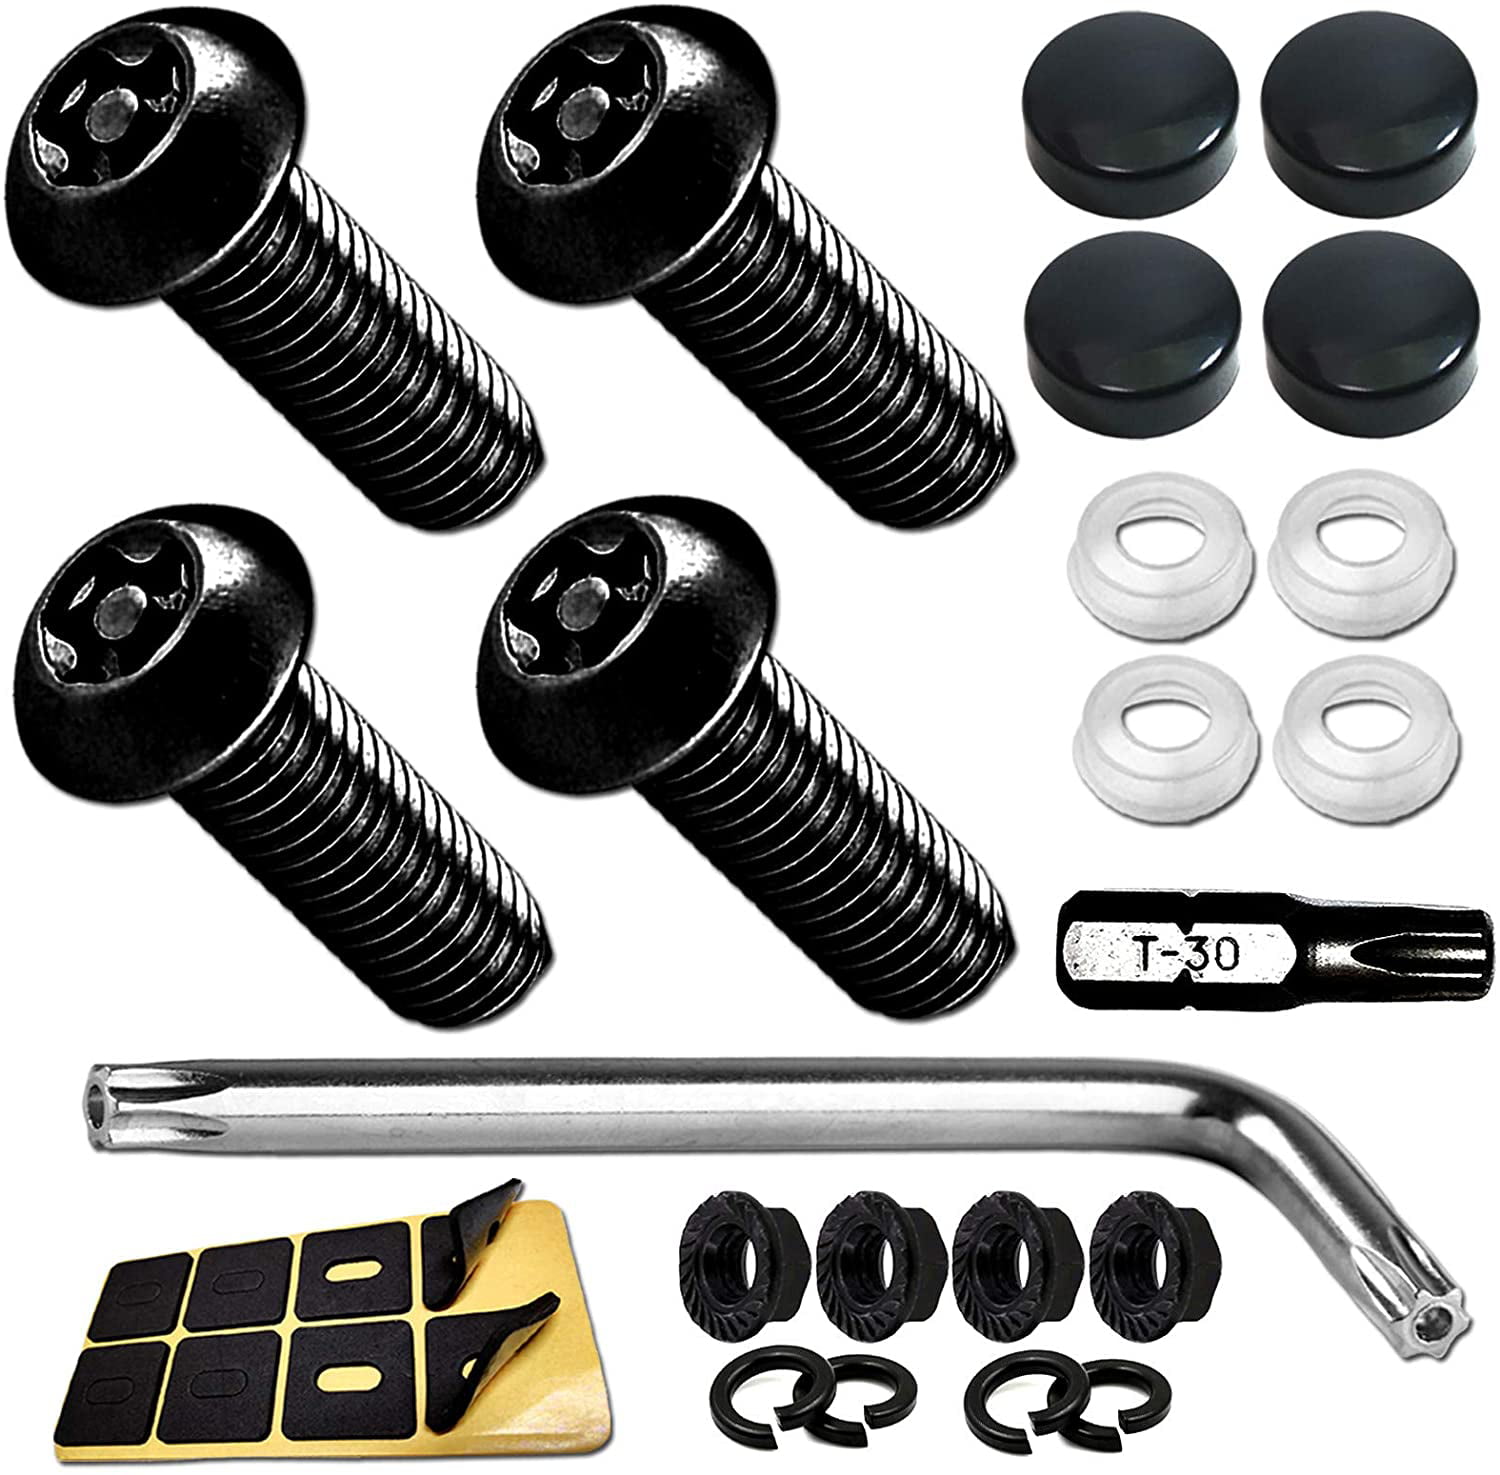 Stainless Steel Plate Mounting Hardware Kit- M6 Nuts Anti Theft License Plate Screws- Security Screws with Chrome Caps for Fastening Front / Rear Car Tag Frame Holder Tire Valve Cover Bolts 1/4 